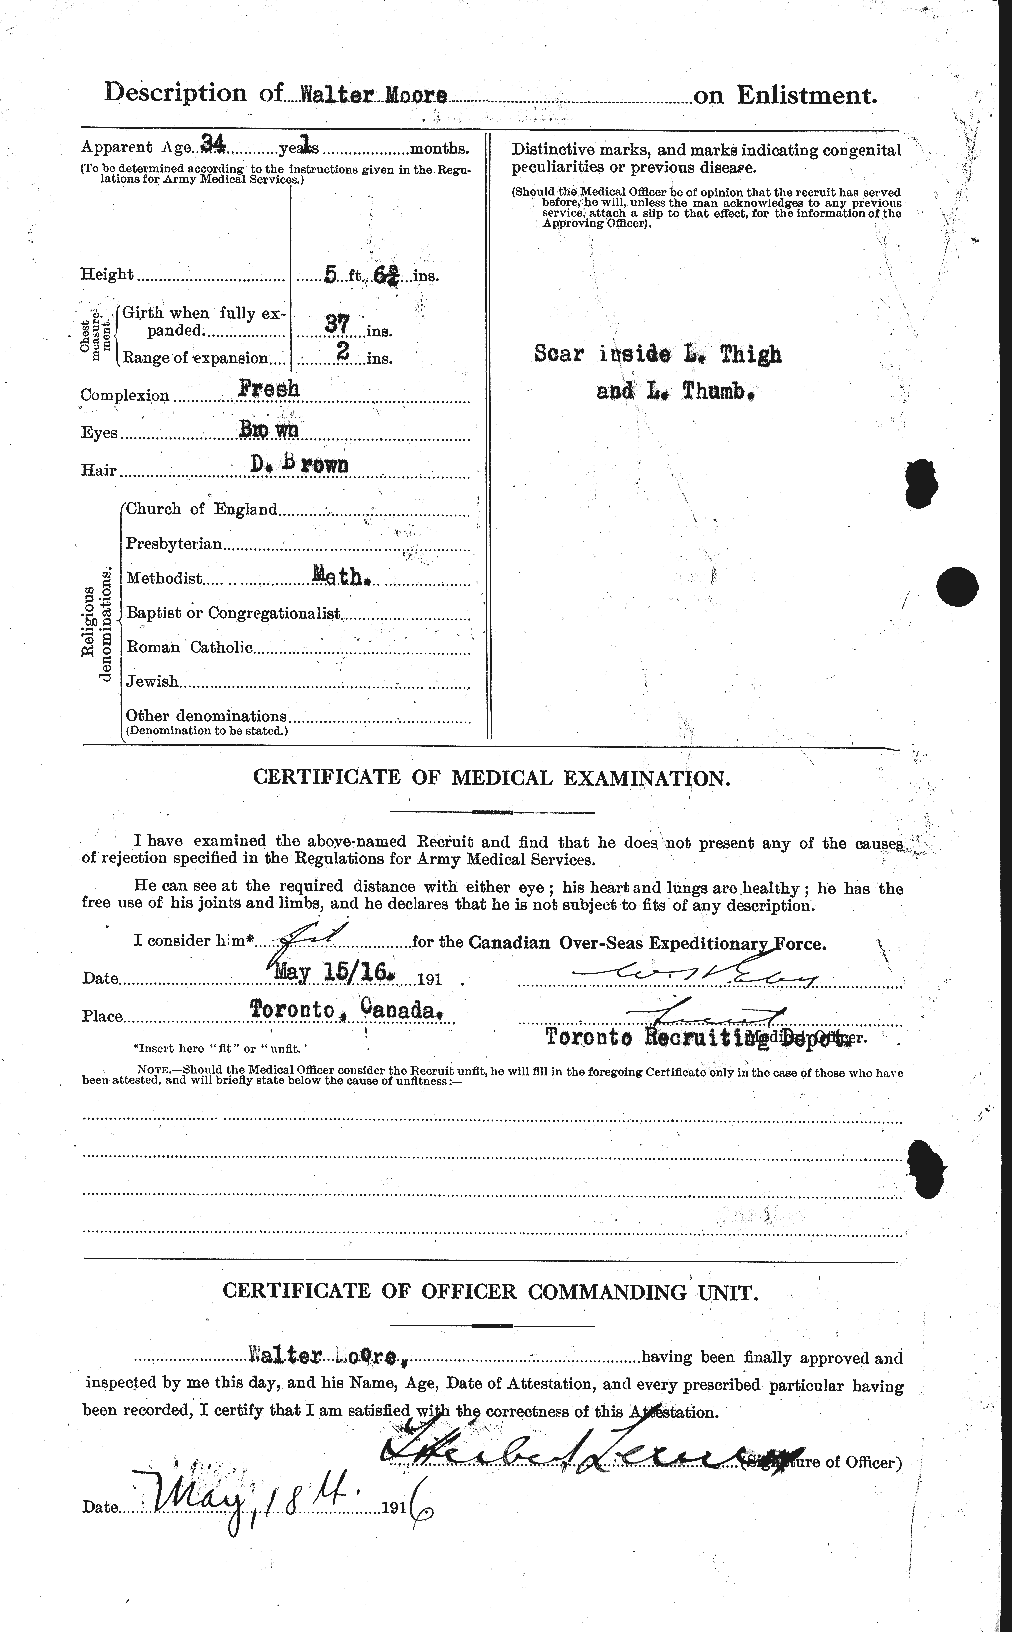 Personnel Records of the First World War - CEF 505696b